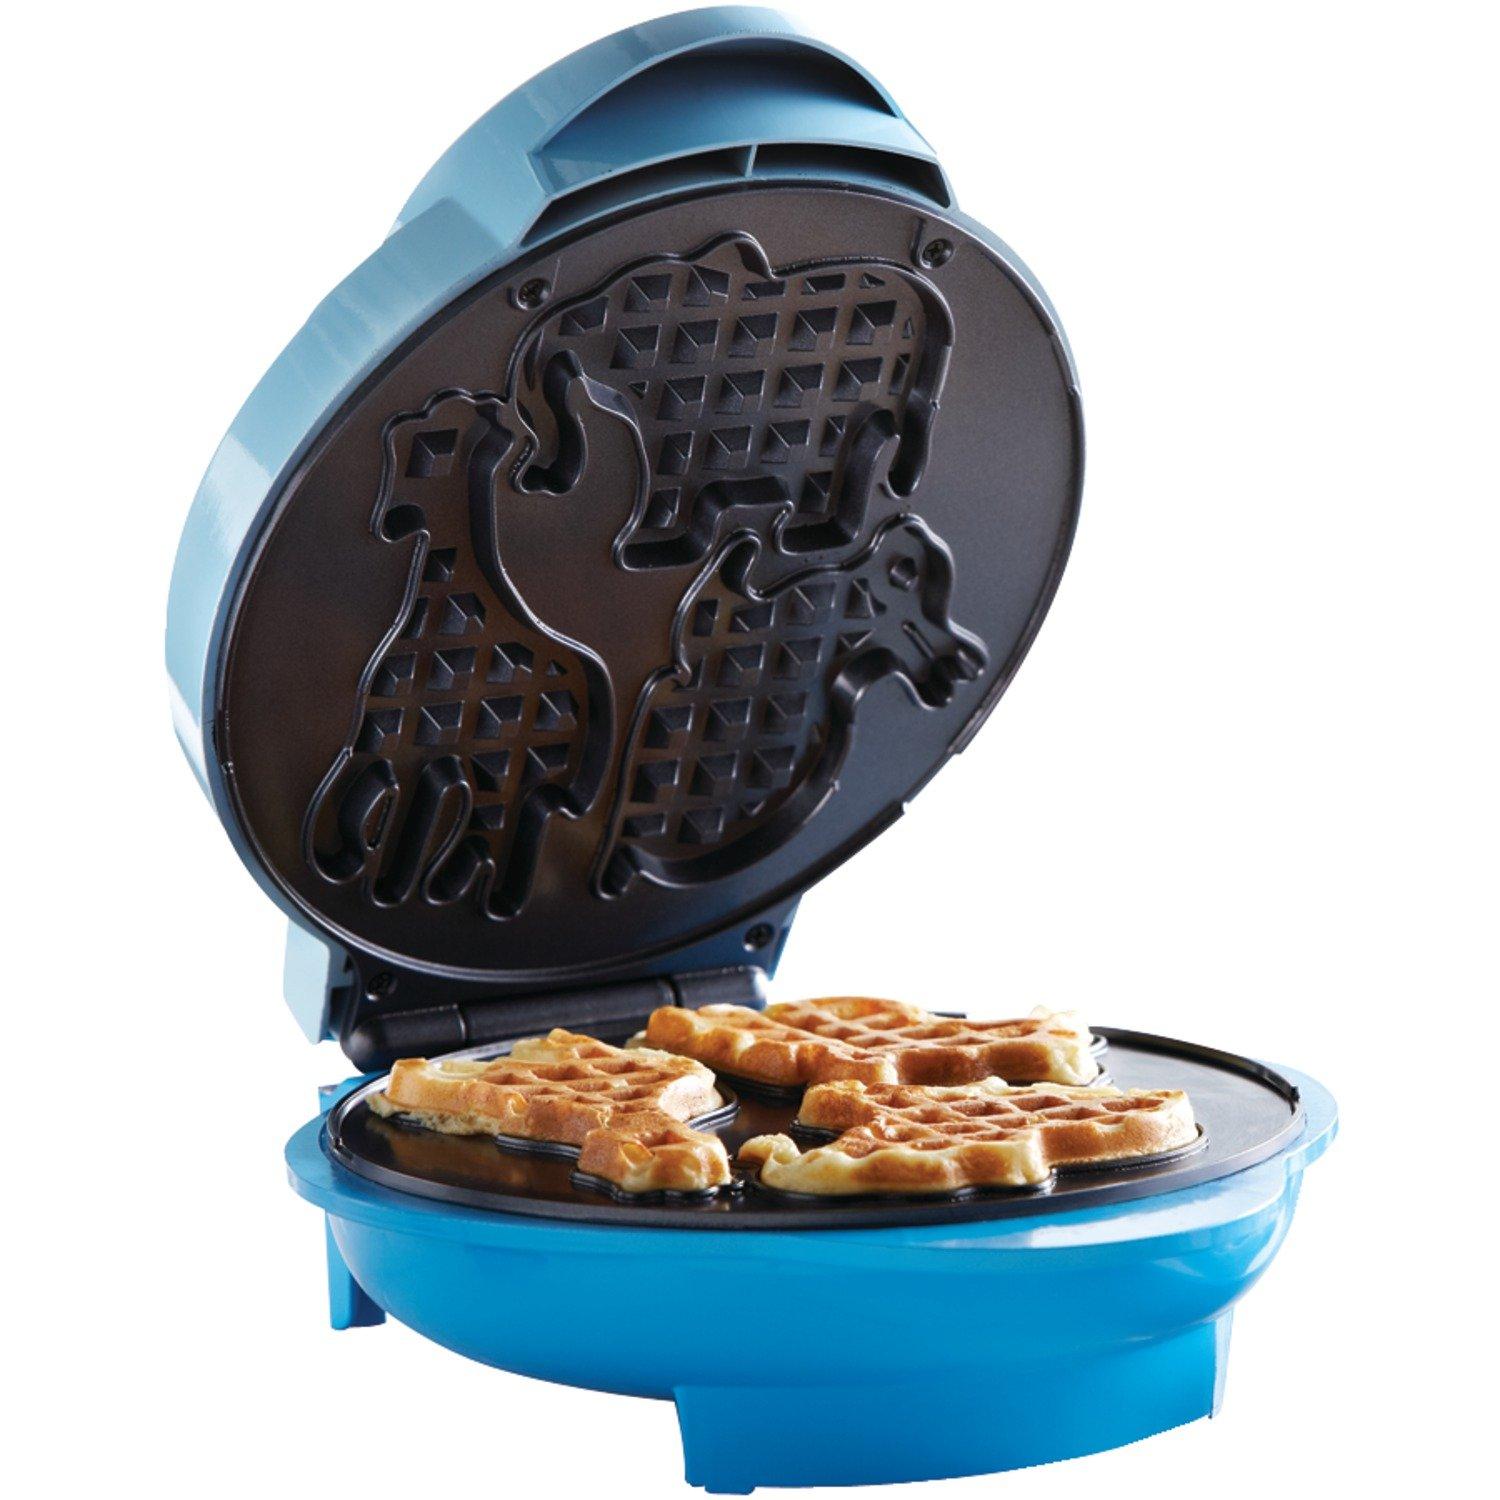 BRENTWOOD® APPLIANCES TS-253 NONSTICK ELECTRIC FOOD MAKER (ANIMAL-SHAPES WAFFLE MAKER)